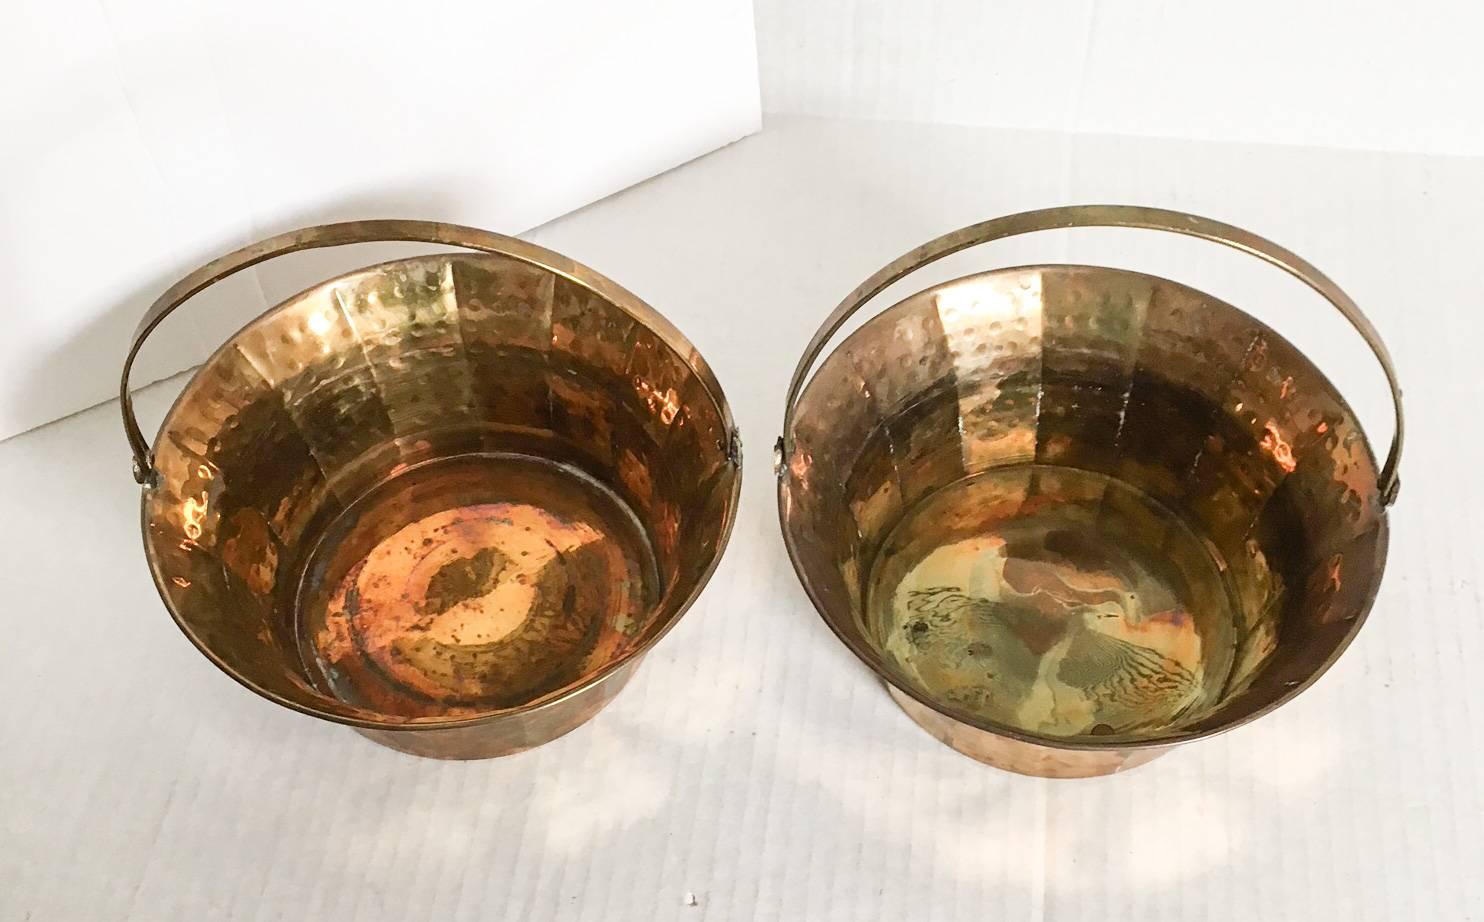 Midcentury circa 1970s, pair of hammered brass fluted baskets with adjustable handles. Both baskets have expected natural brass age patina. Dimensions with handles up: 7.5